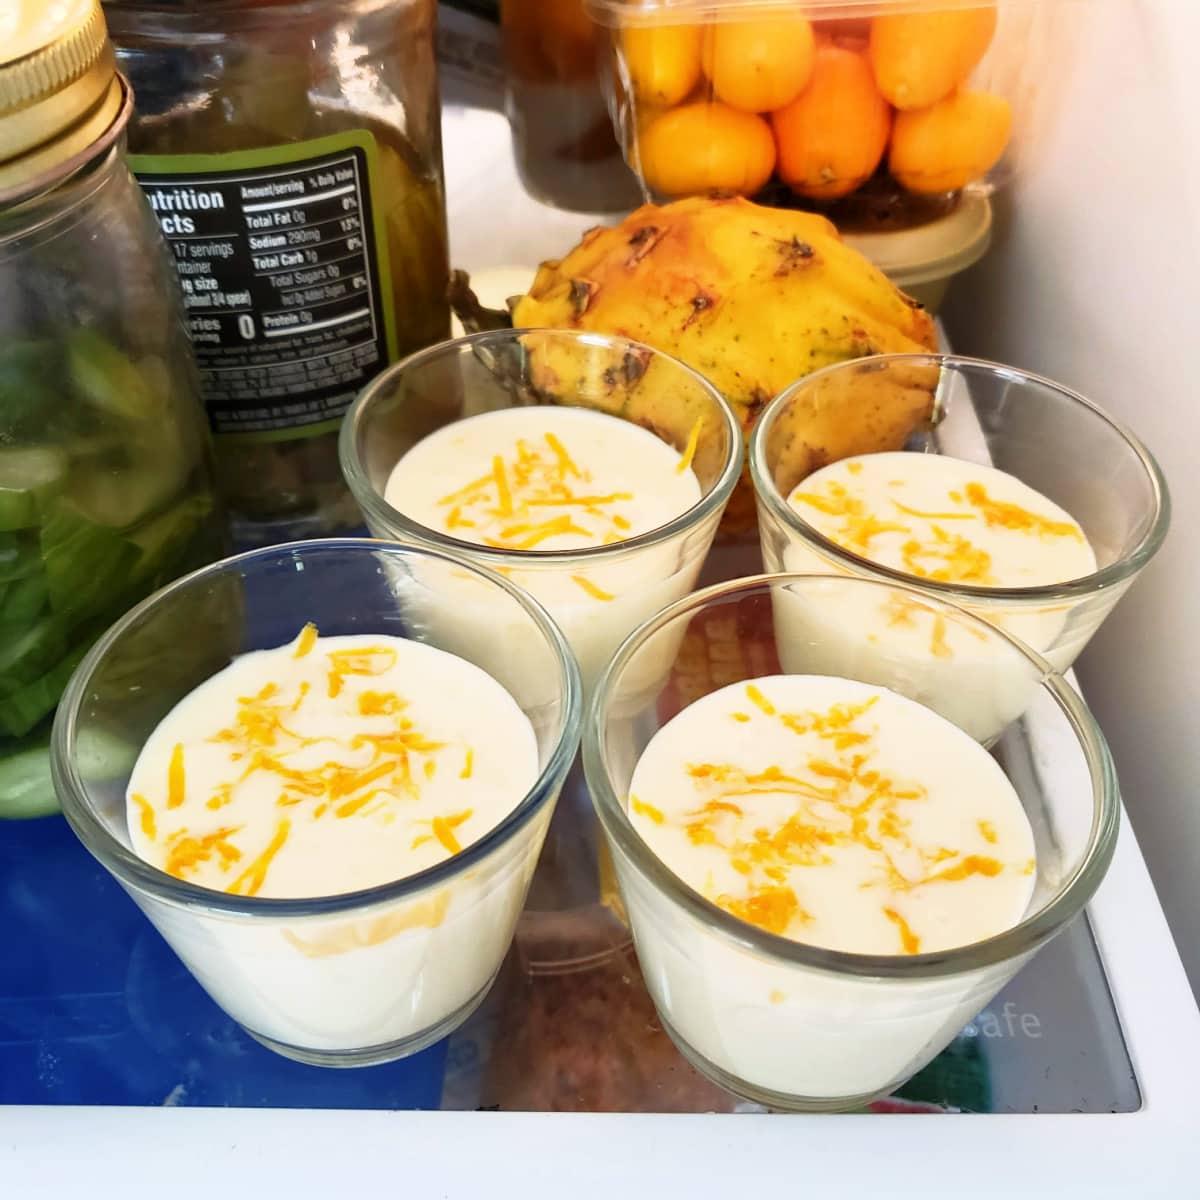 4 glasses with Meyer Lemon Posset are on a refrigerator shelf with other jars and items